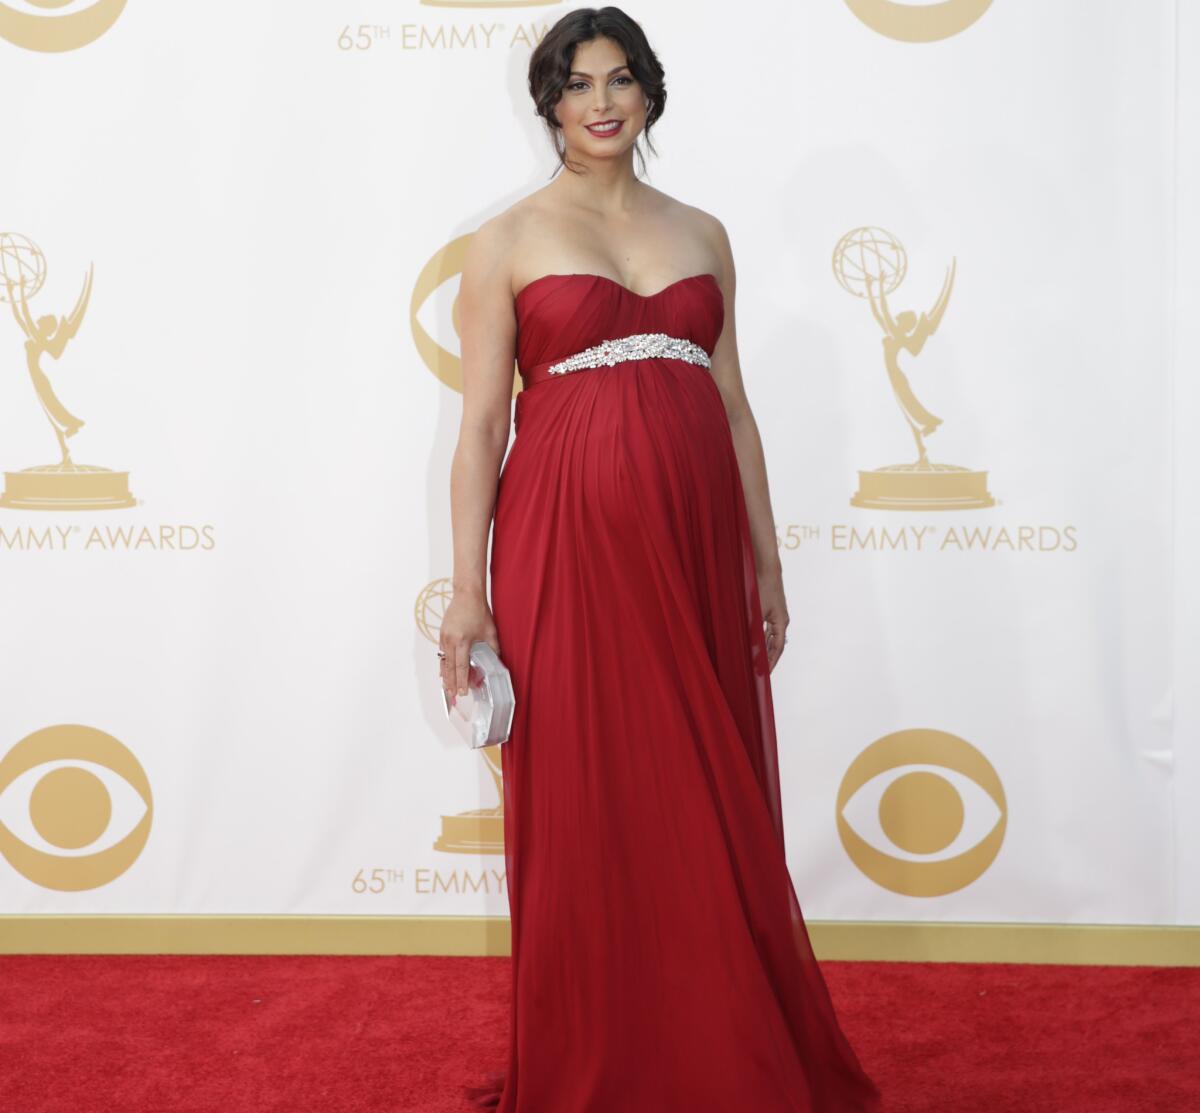 Morena Baccarin of "Homeland" gave birth to a baby boy.